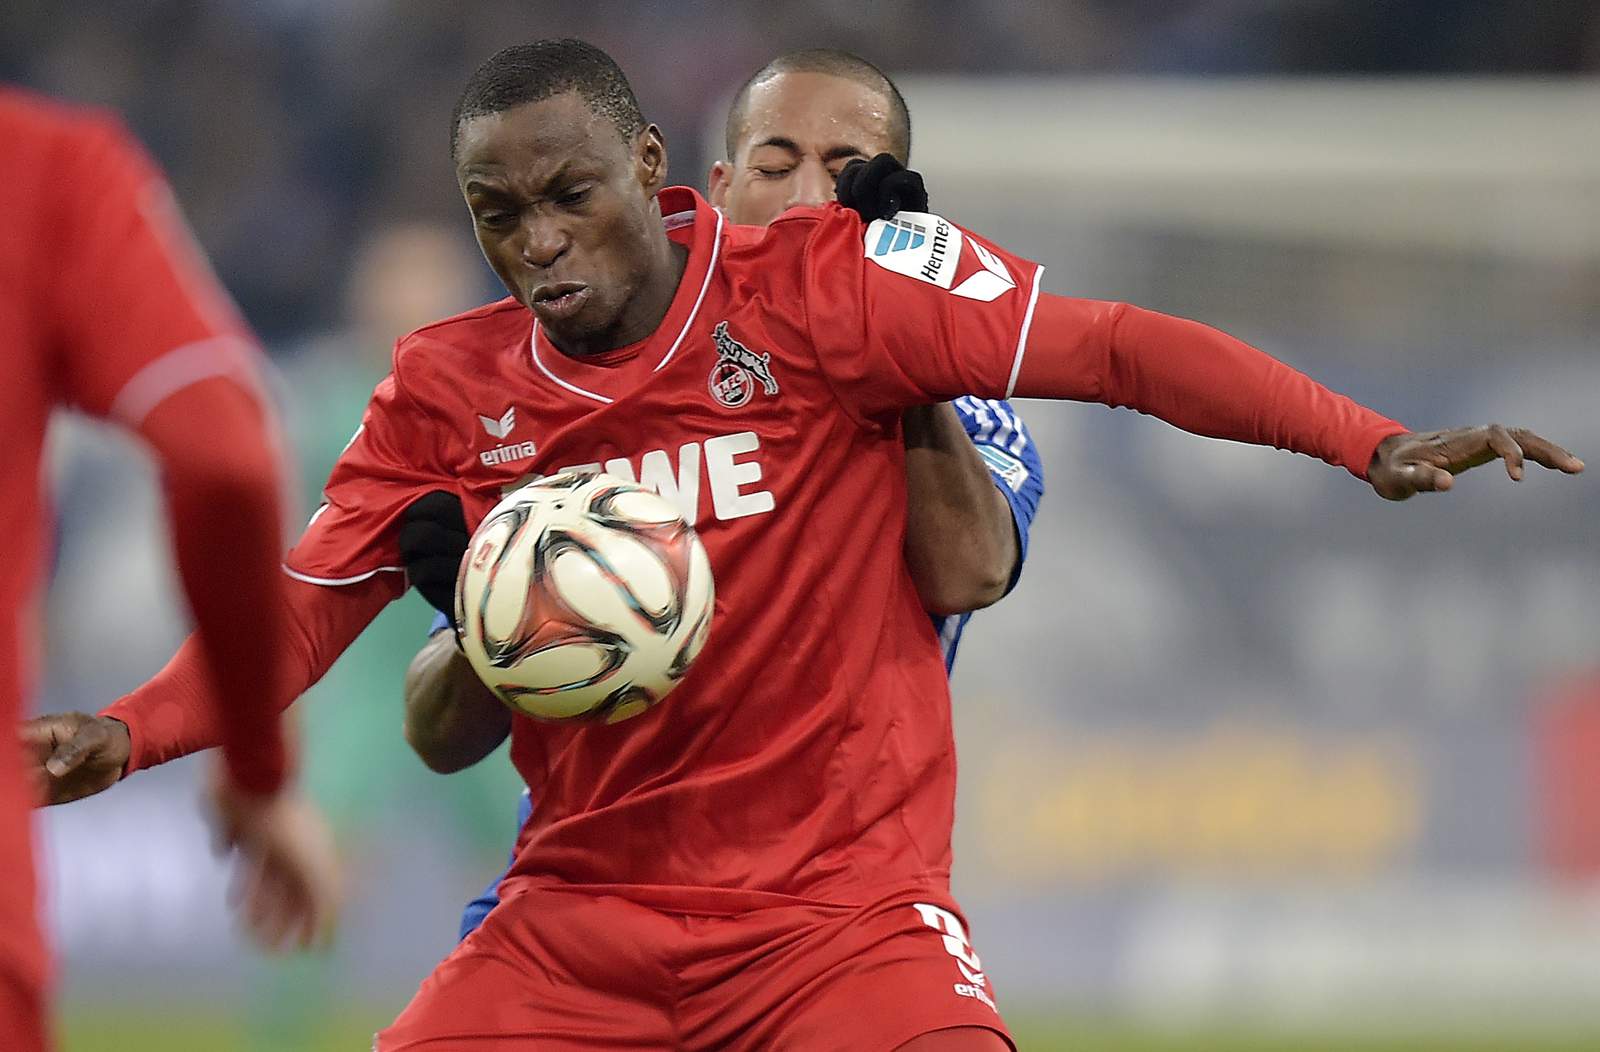 Union Berlin's Anthony Ujah calls on players to fight racism